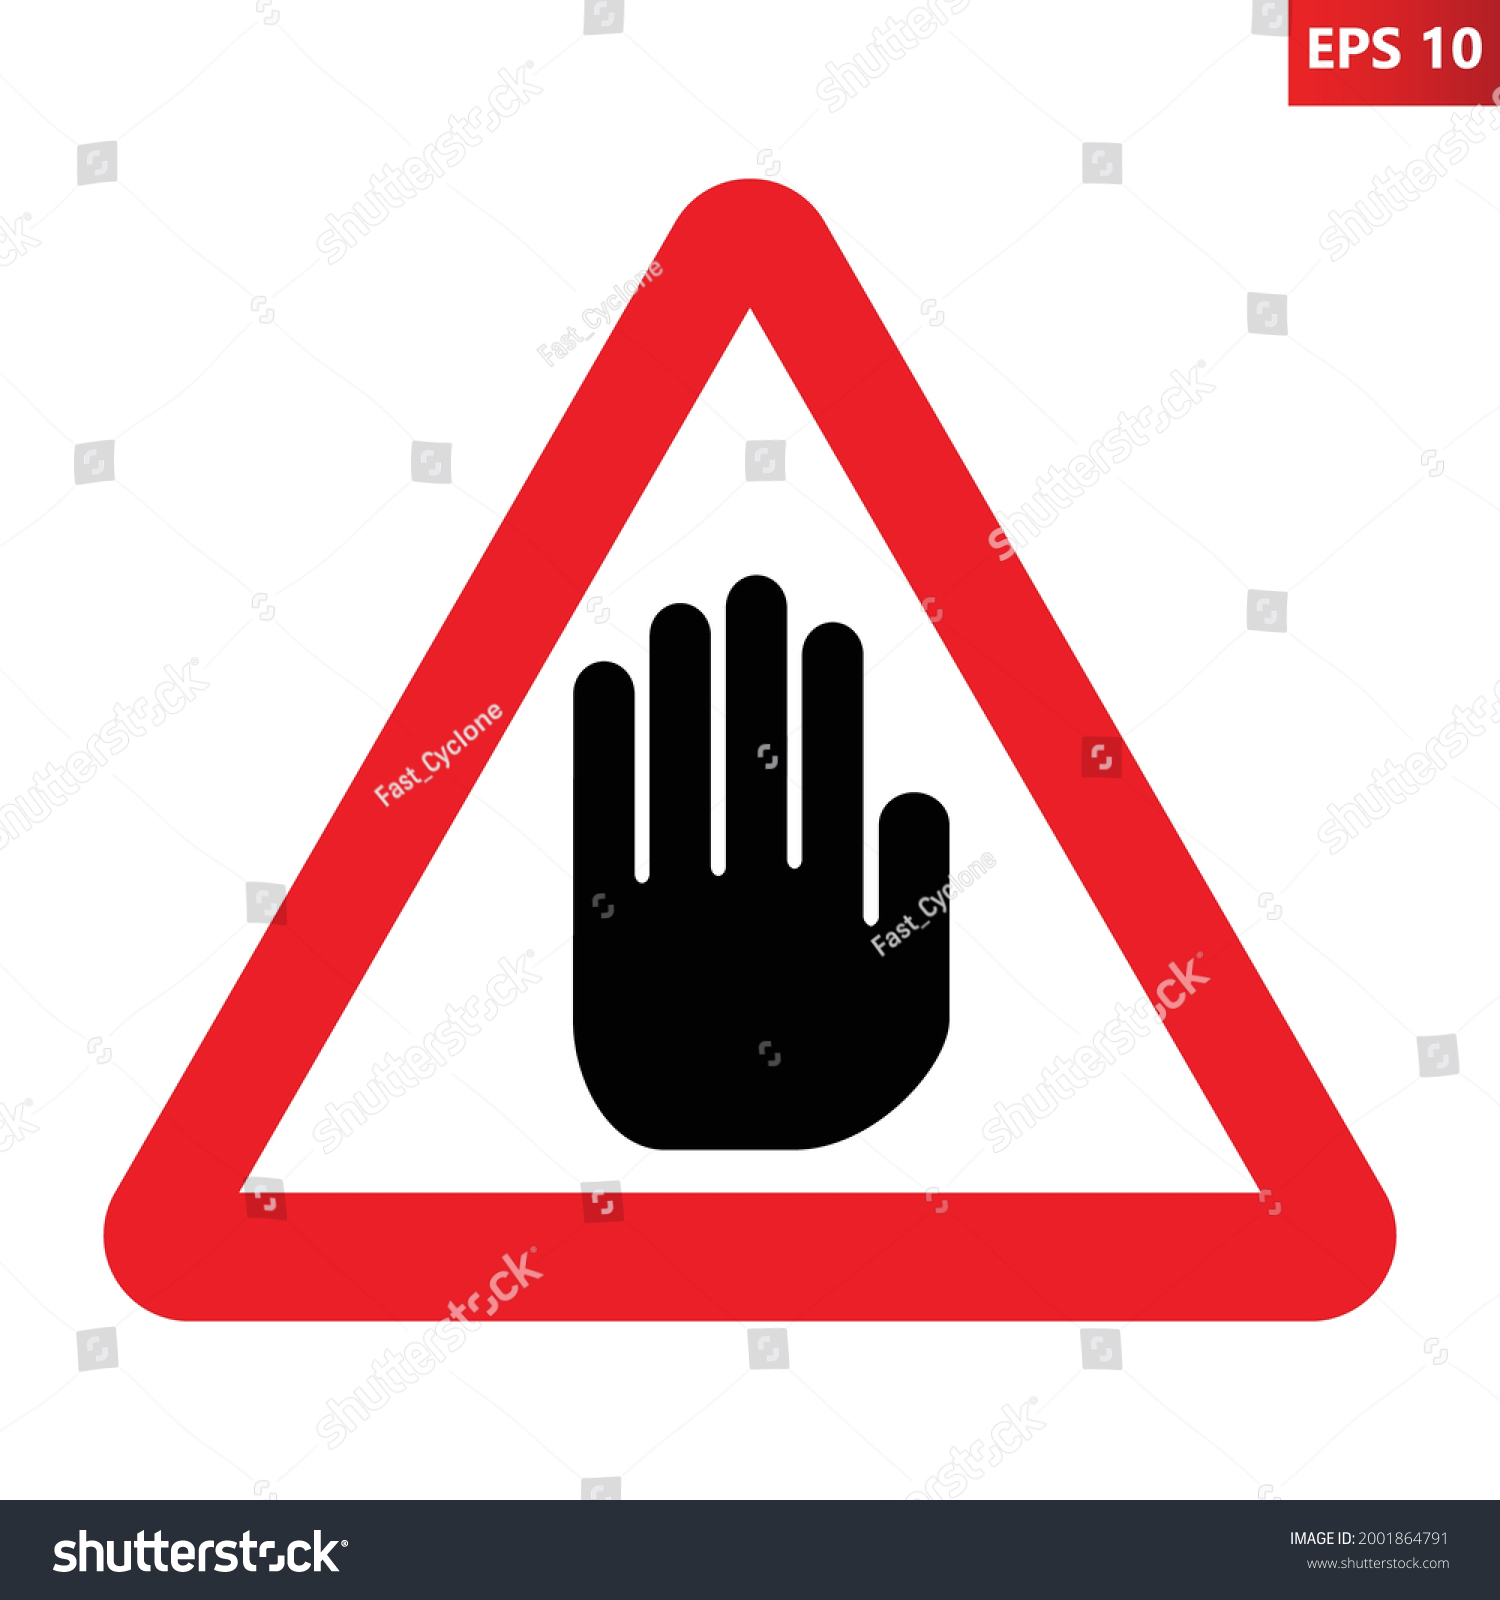 SVG of Red triangle sign with big black hand icon inside. Vector illustration of warning traffic sign. Absolute stop symbol for any purpose. Access denied. Do not enter. Caution. svg